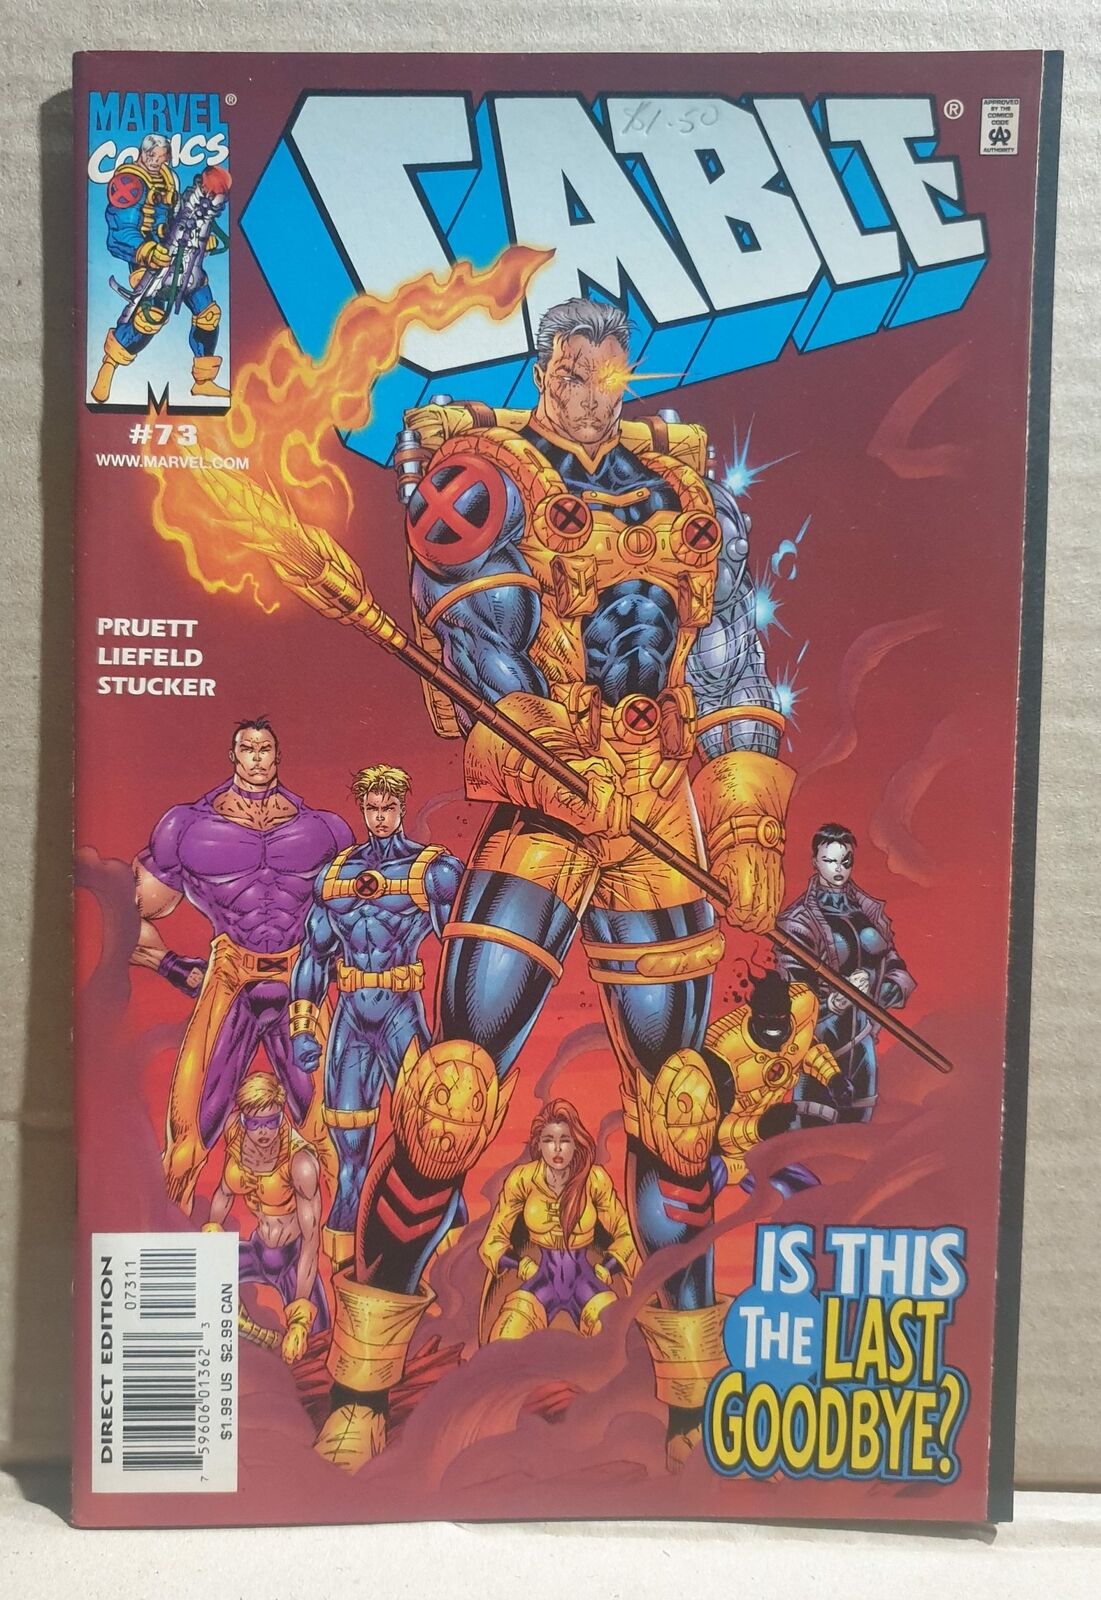 COMIC BOOK - MARVEL CABLE #73